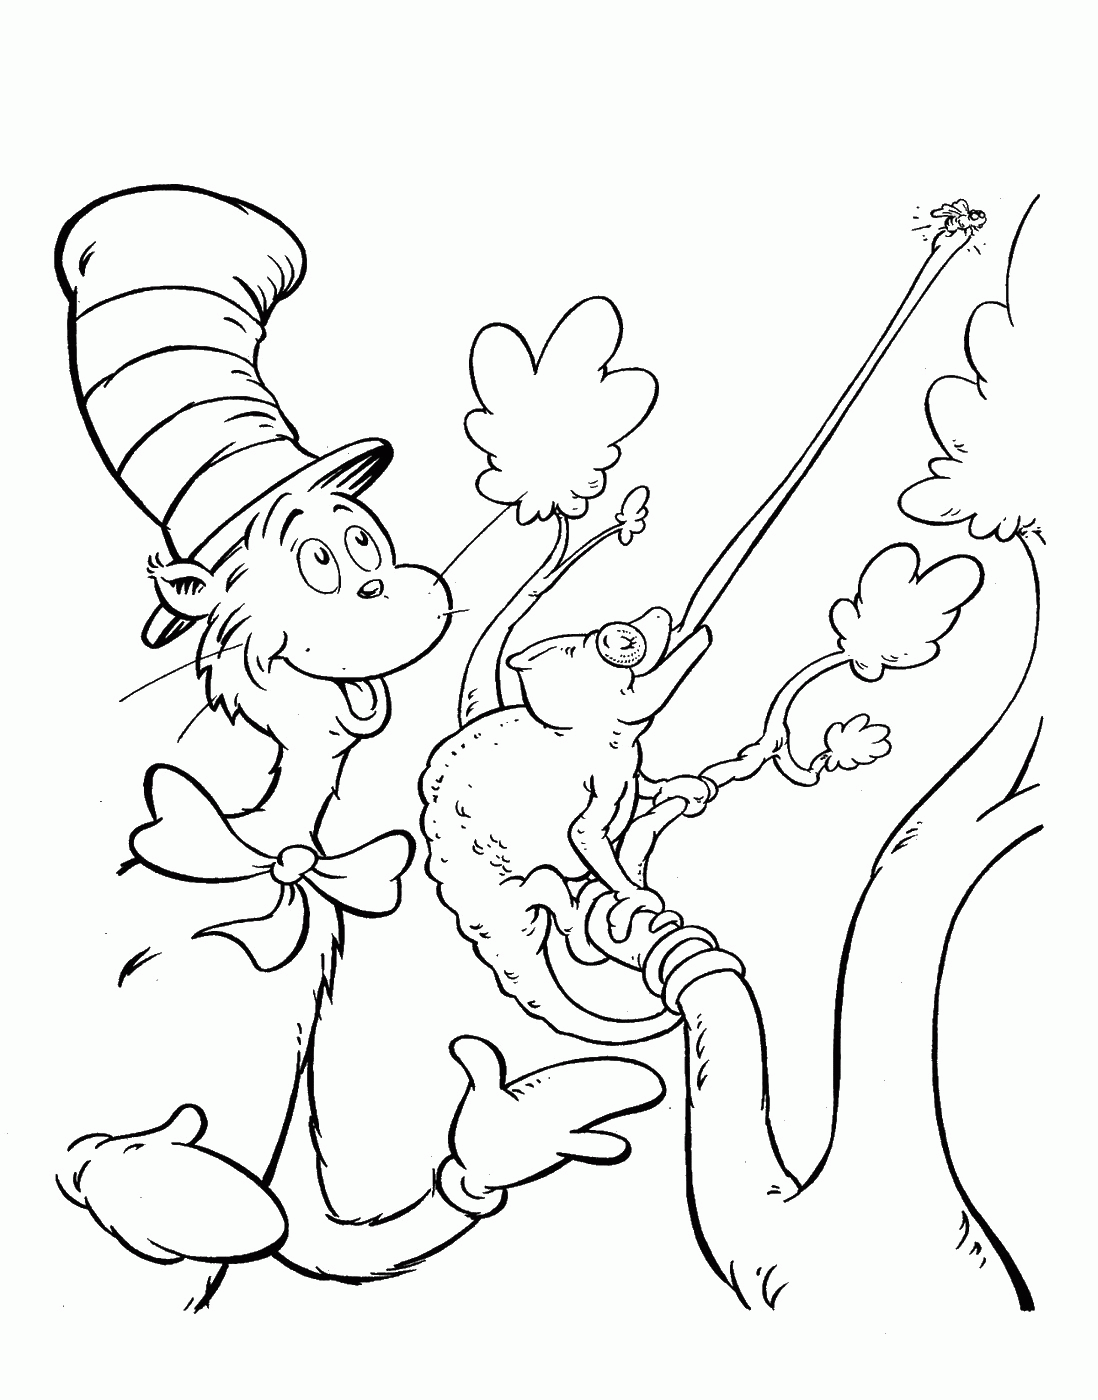 cat-in-the-hat-coloring-page-0010-q1